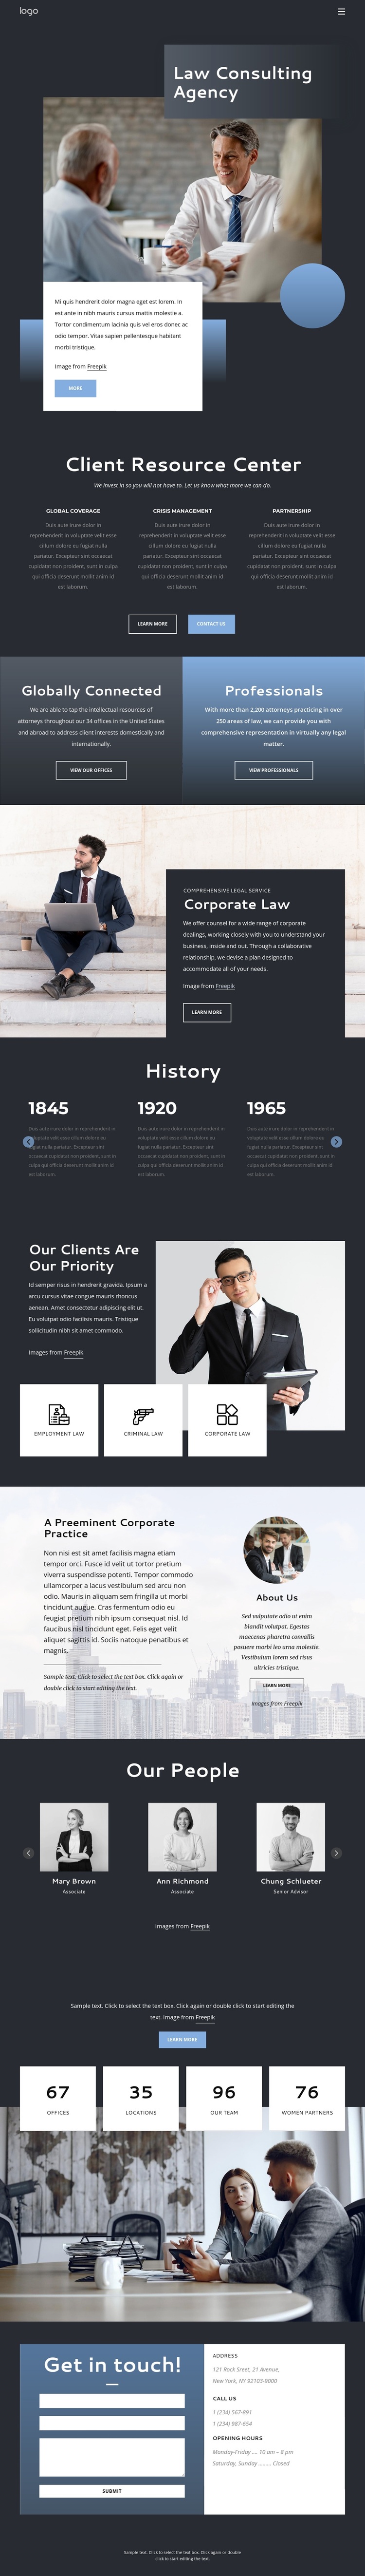 Law consulting agency Template